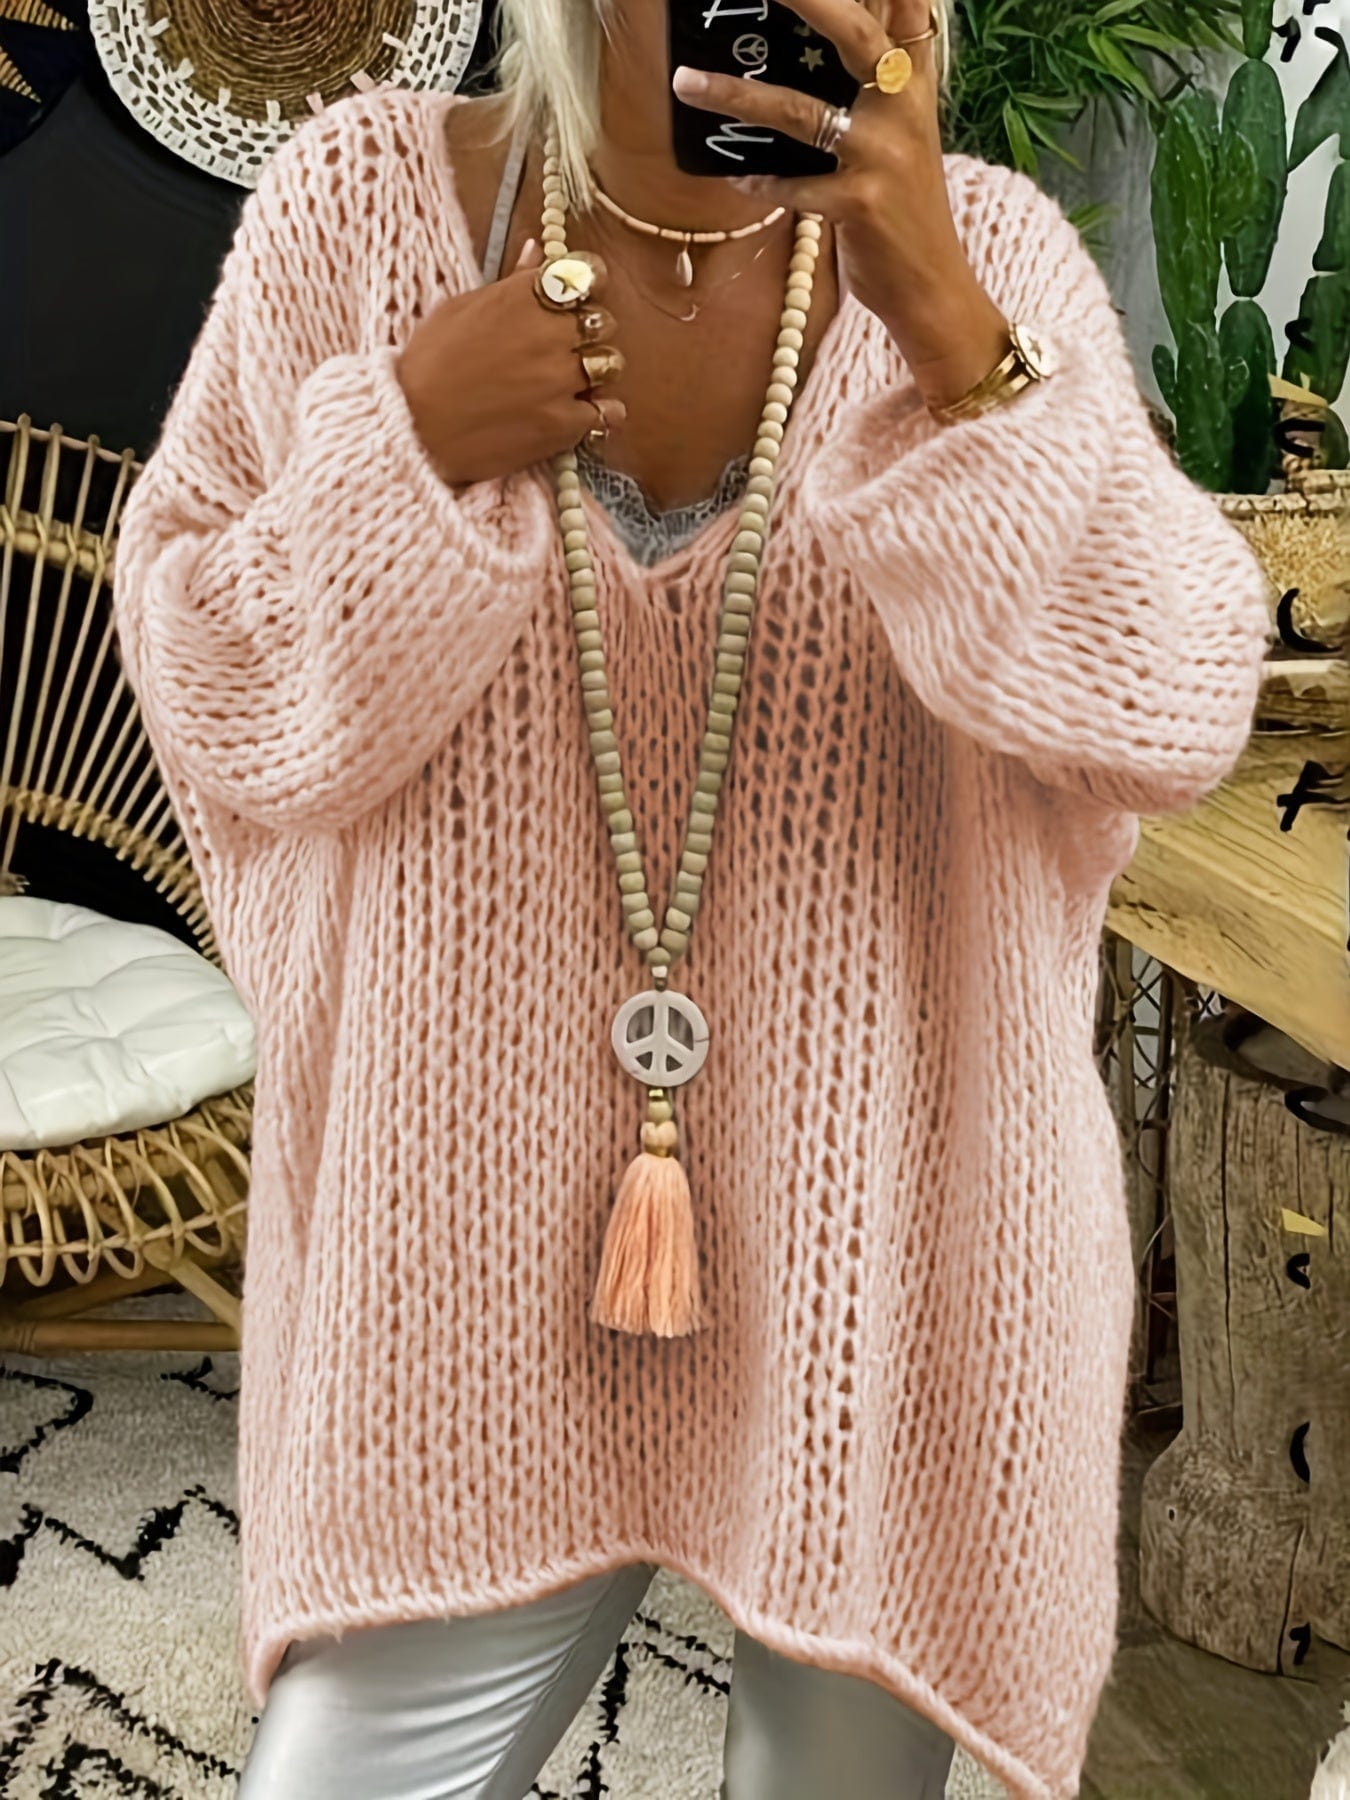 Plus Size Casual Sweater, Women's Plus Solid Long Sleeve V Neck Oversized Jumper PLU2309A1701PNK1XL(14) Pink / 1XL(14)